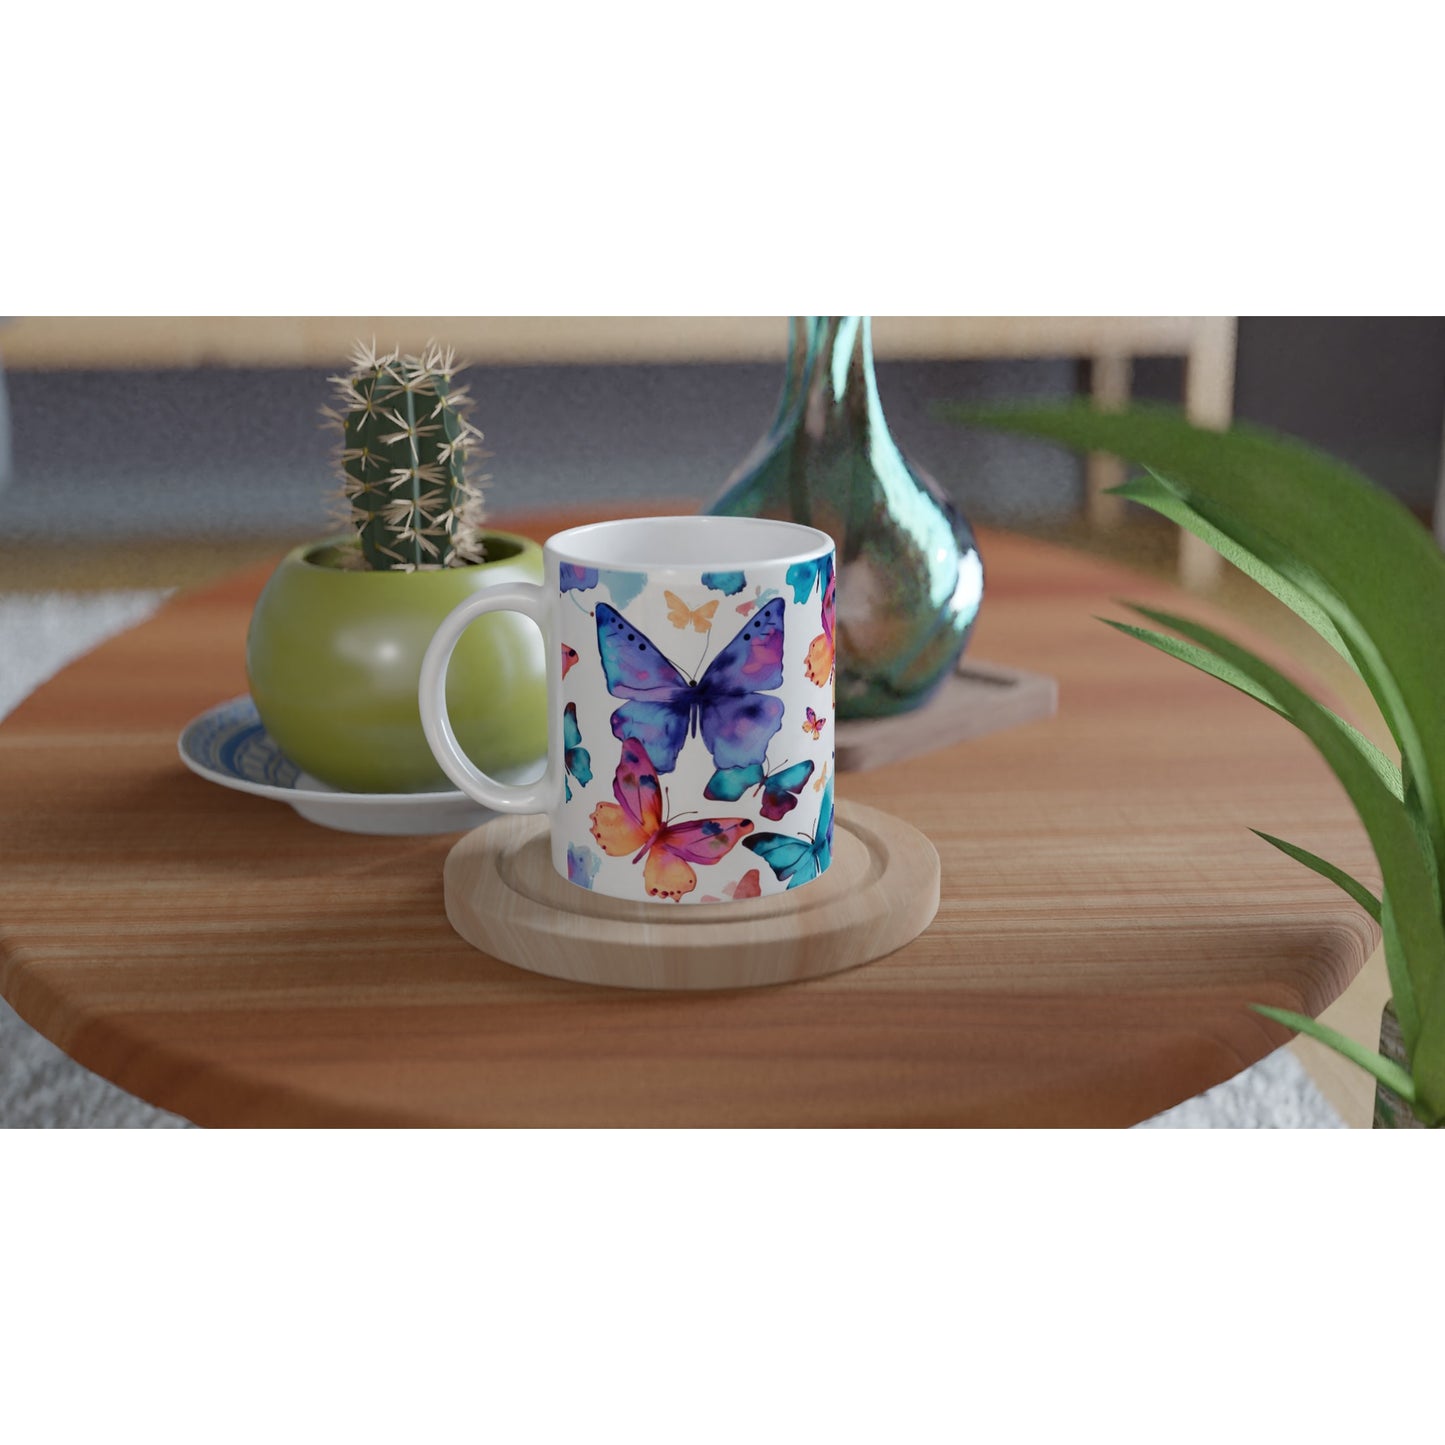 Whimsical Wings: 11oz Ceramic Mug with Watercolor Painted Butterflies